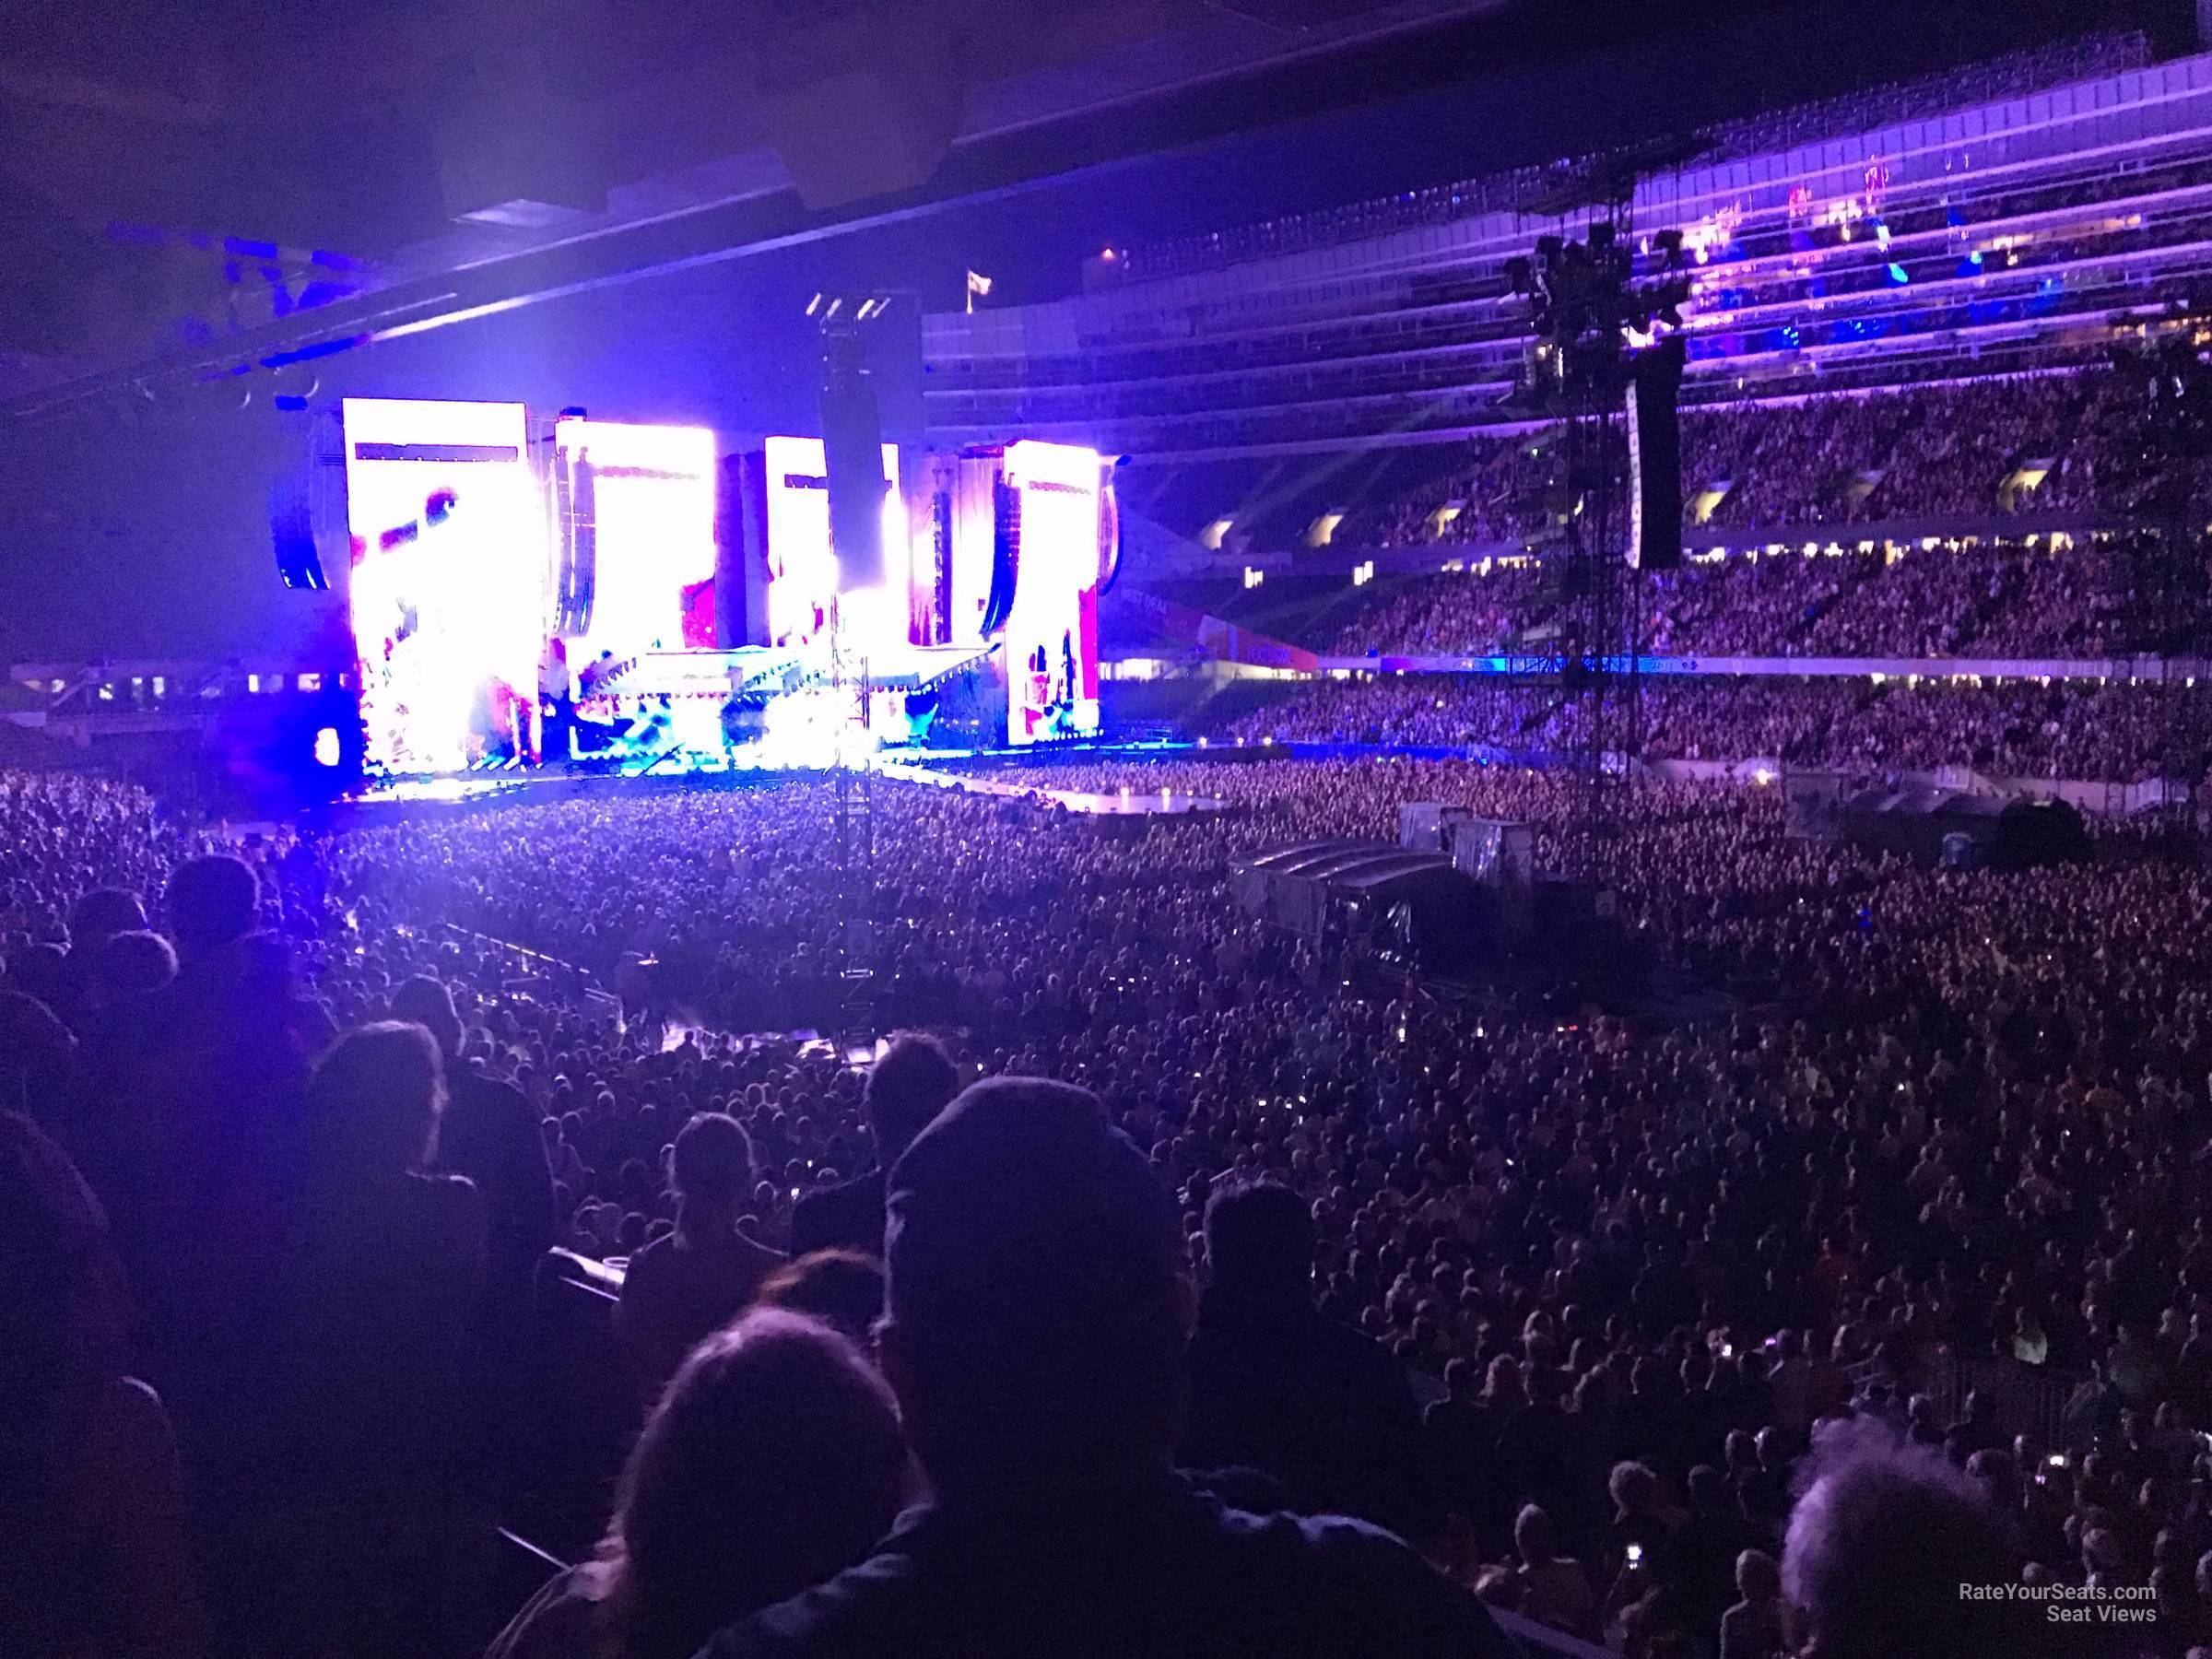 section 232, row 4 seat view  for concert - soldier field